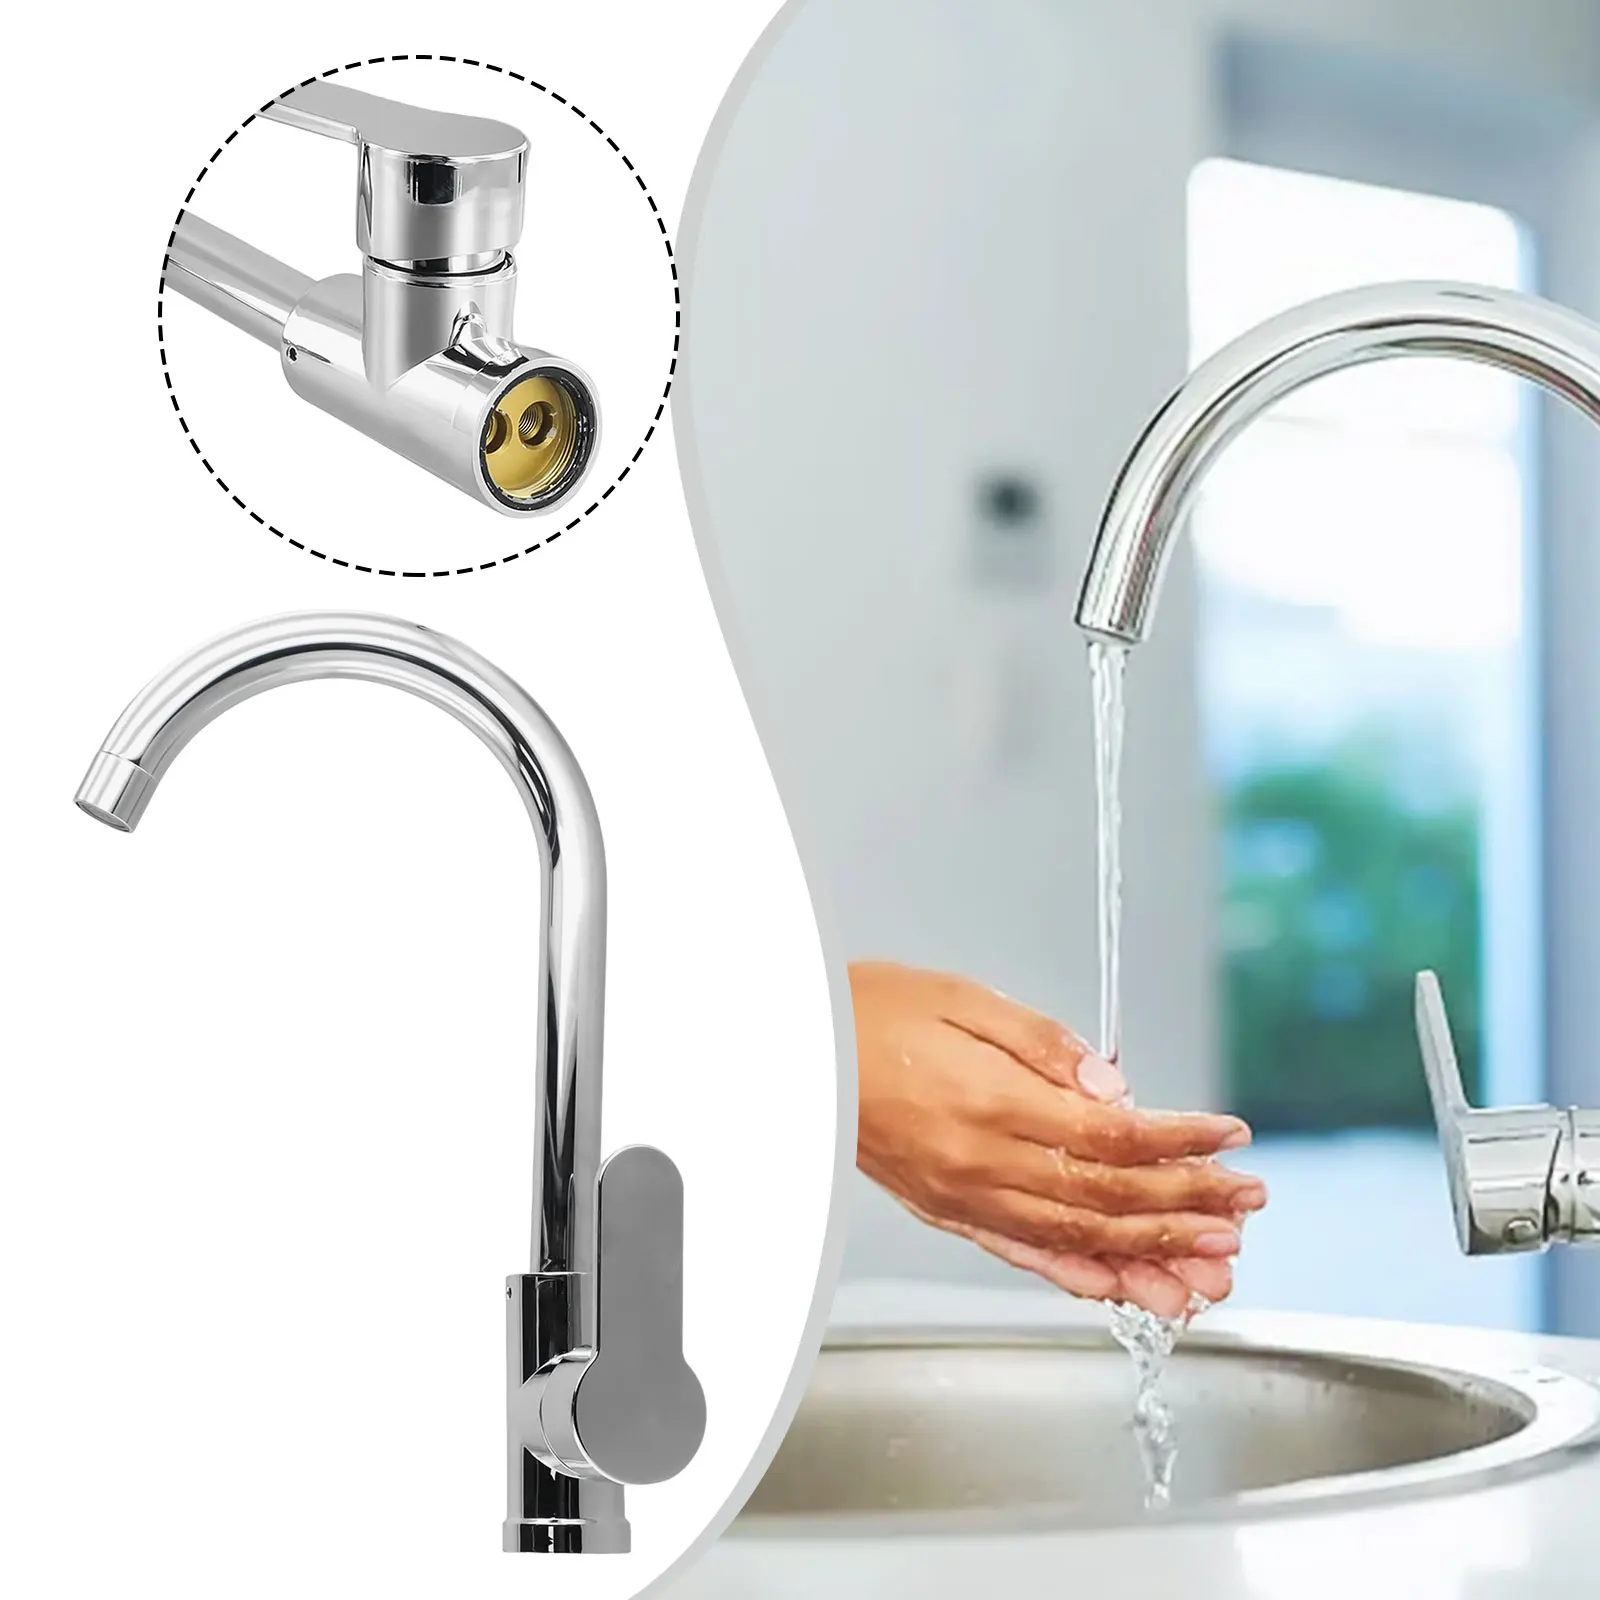 

1x Kitchen Faucet Brushed Stainless Stee 360 ° Rotating Swan Neck Cold And Hot Mixer Taps Deck Mounted Single Handle-Faucet